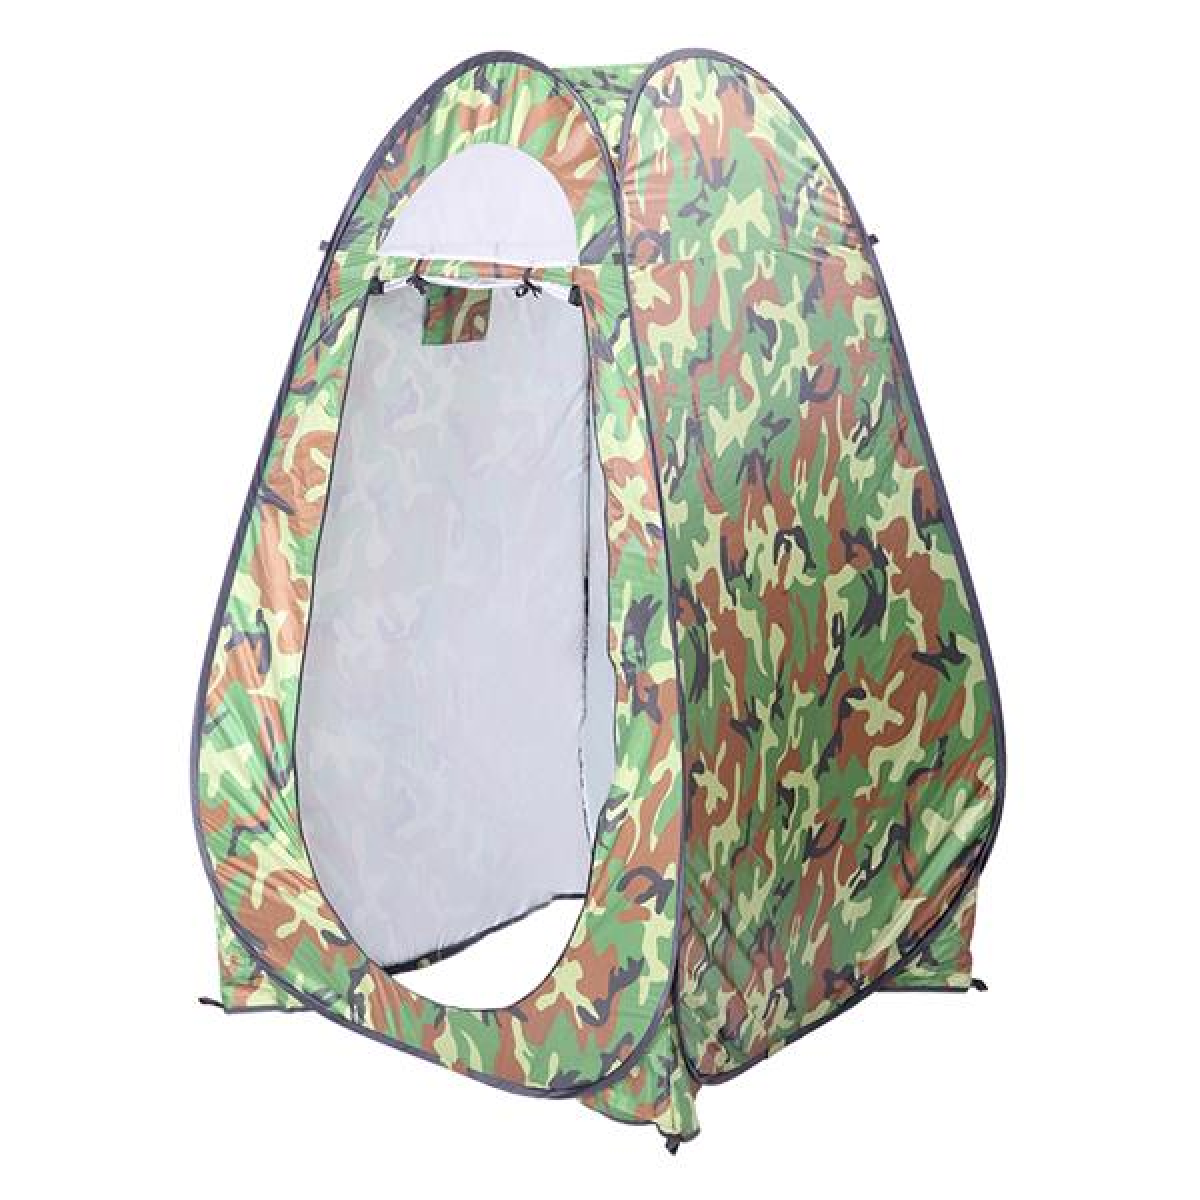 US IN STOCK- Shower Tents For Camping Pop-Up Privacy TentPortable Shower Tent Outdoor Camp Bathroom Changing Dressing Room Instant Privacy Shelters for Hiking Beach Picnic Fishing Potty - image 3 of 13